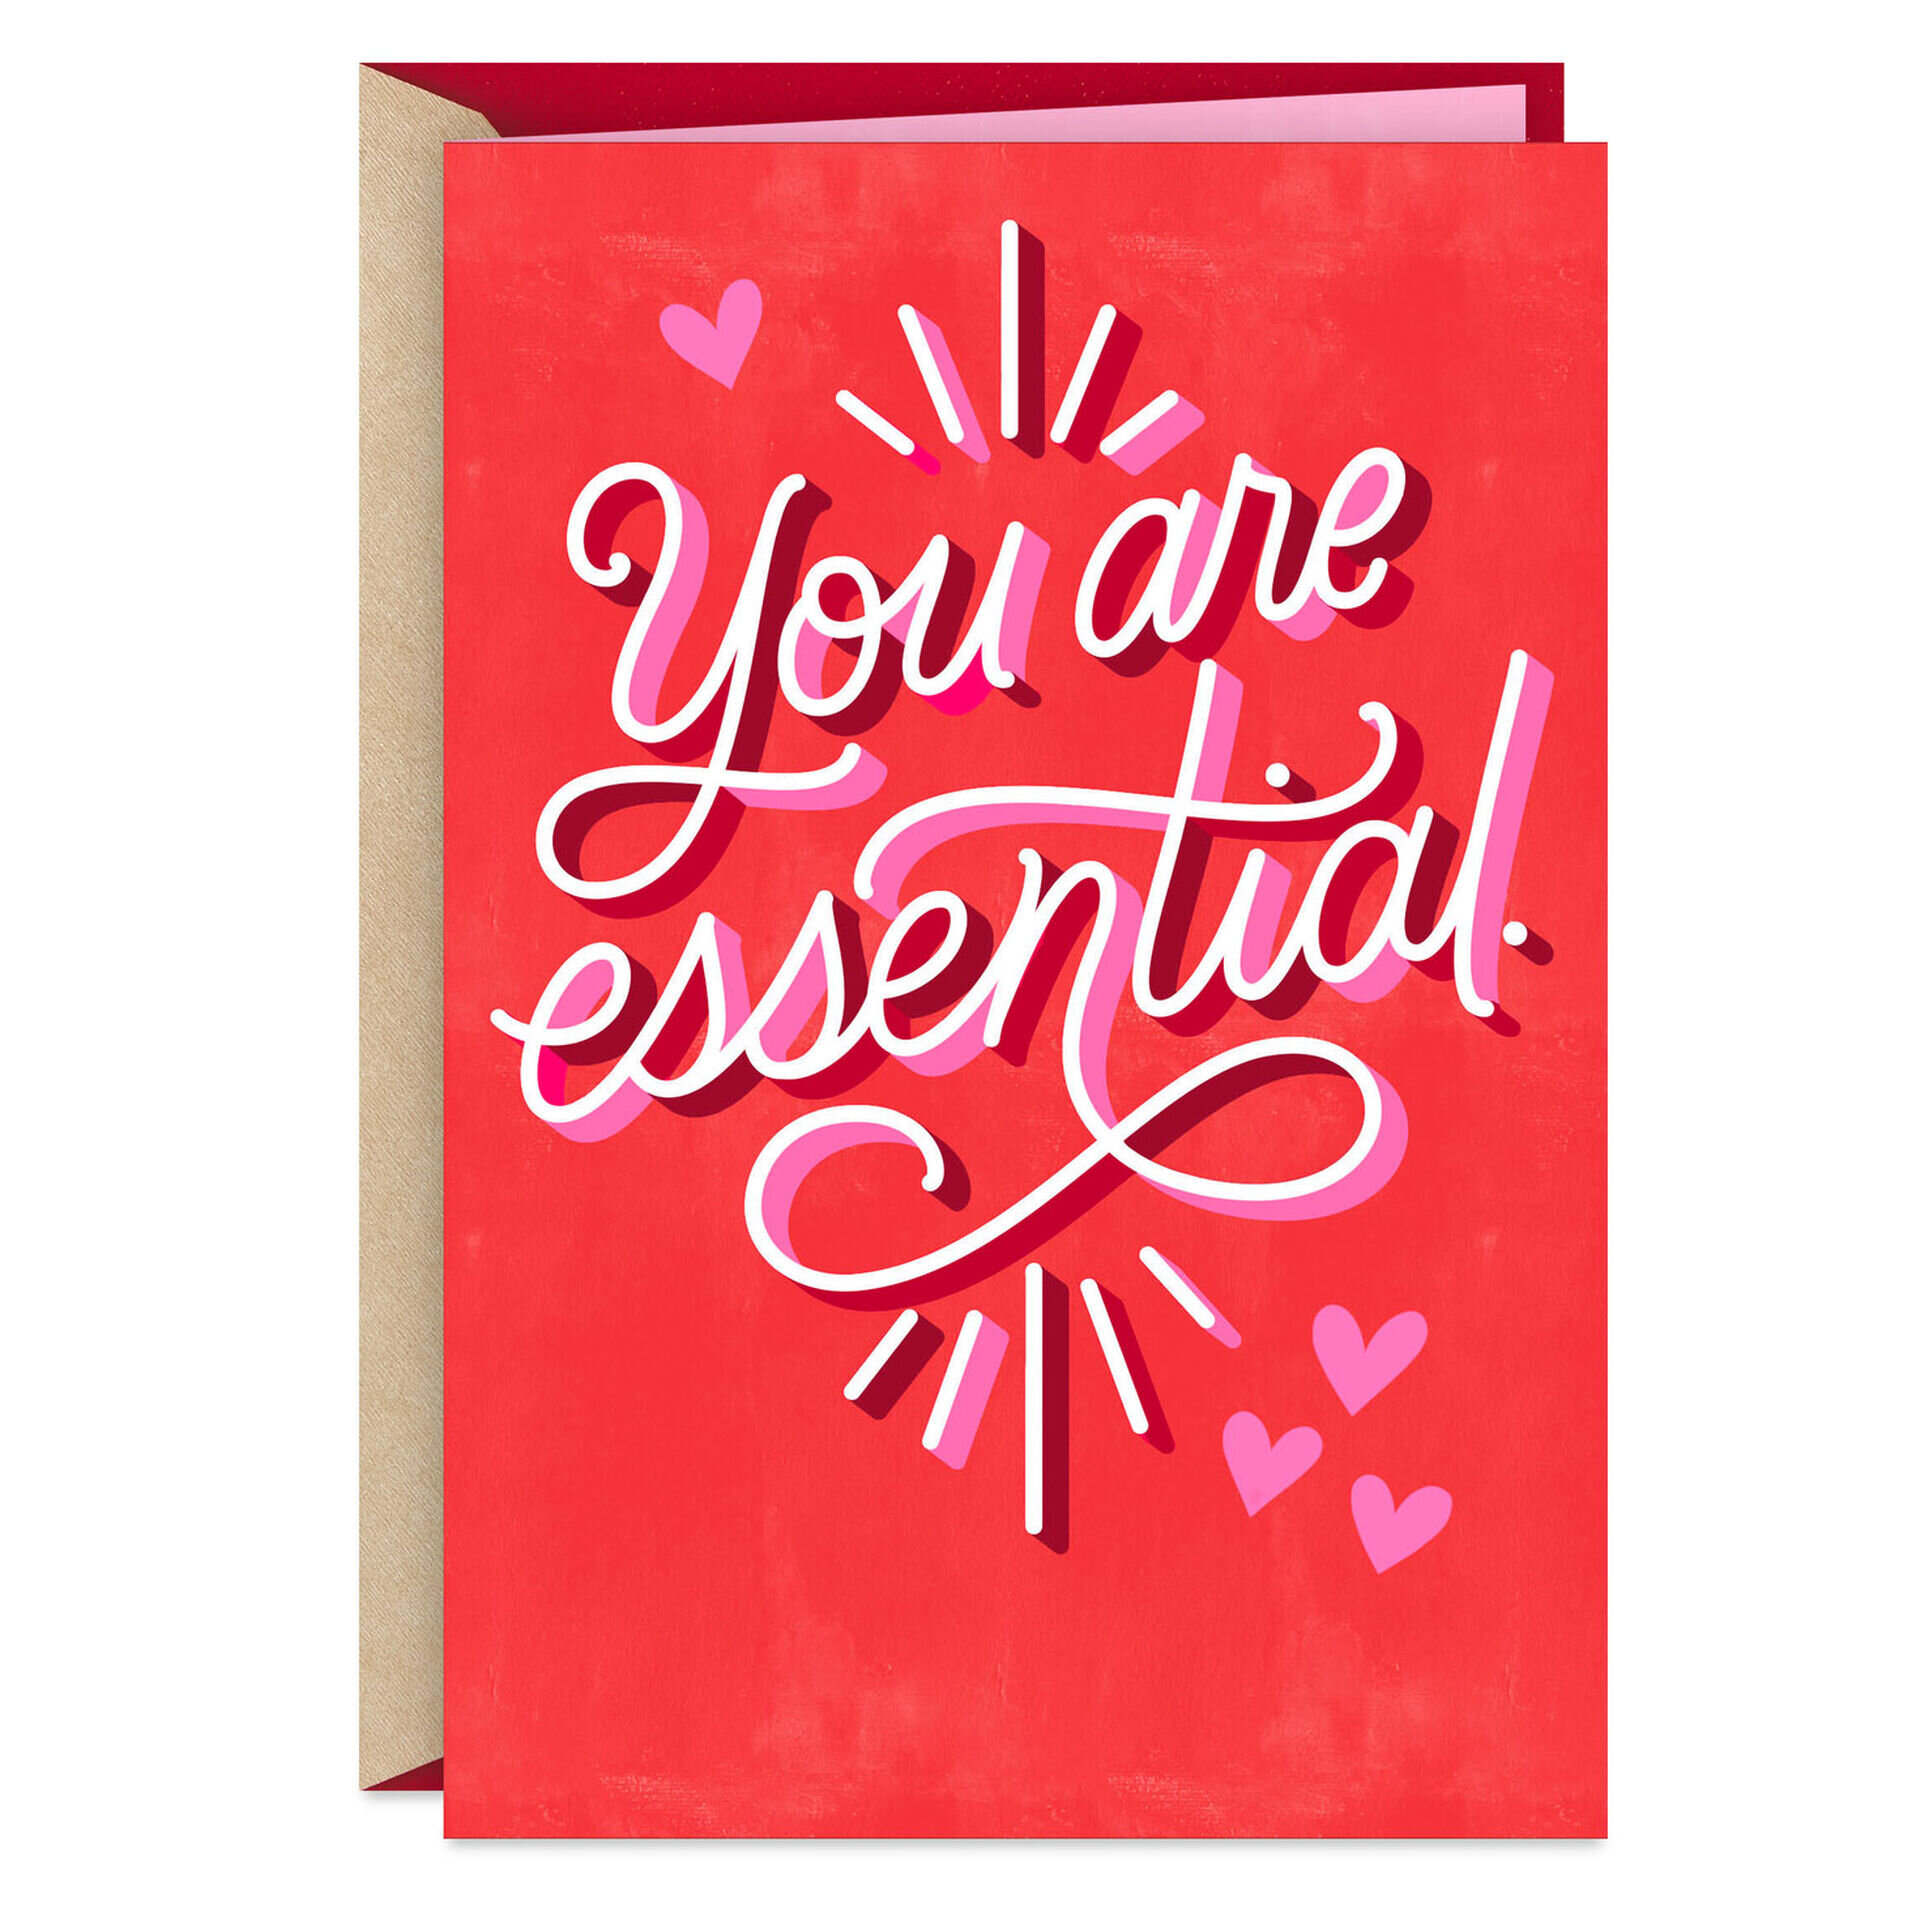 Youre-Essential-to-Me-Lettering-Valentines-Day-Card_299VEE8965_01.jpg